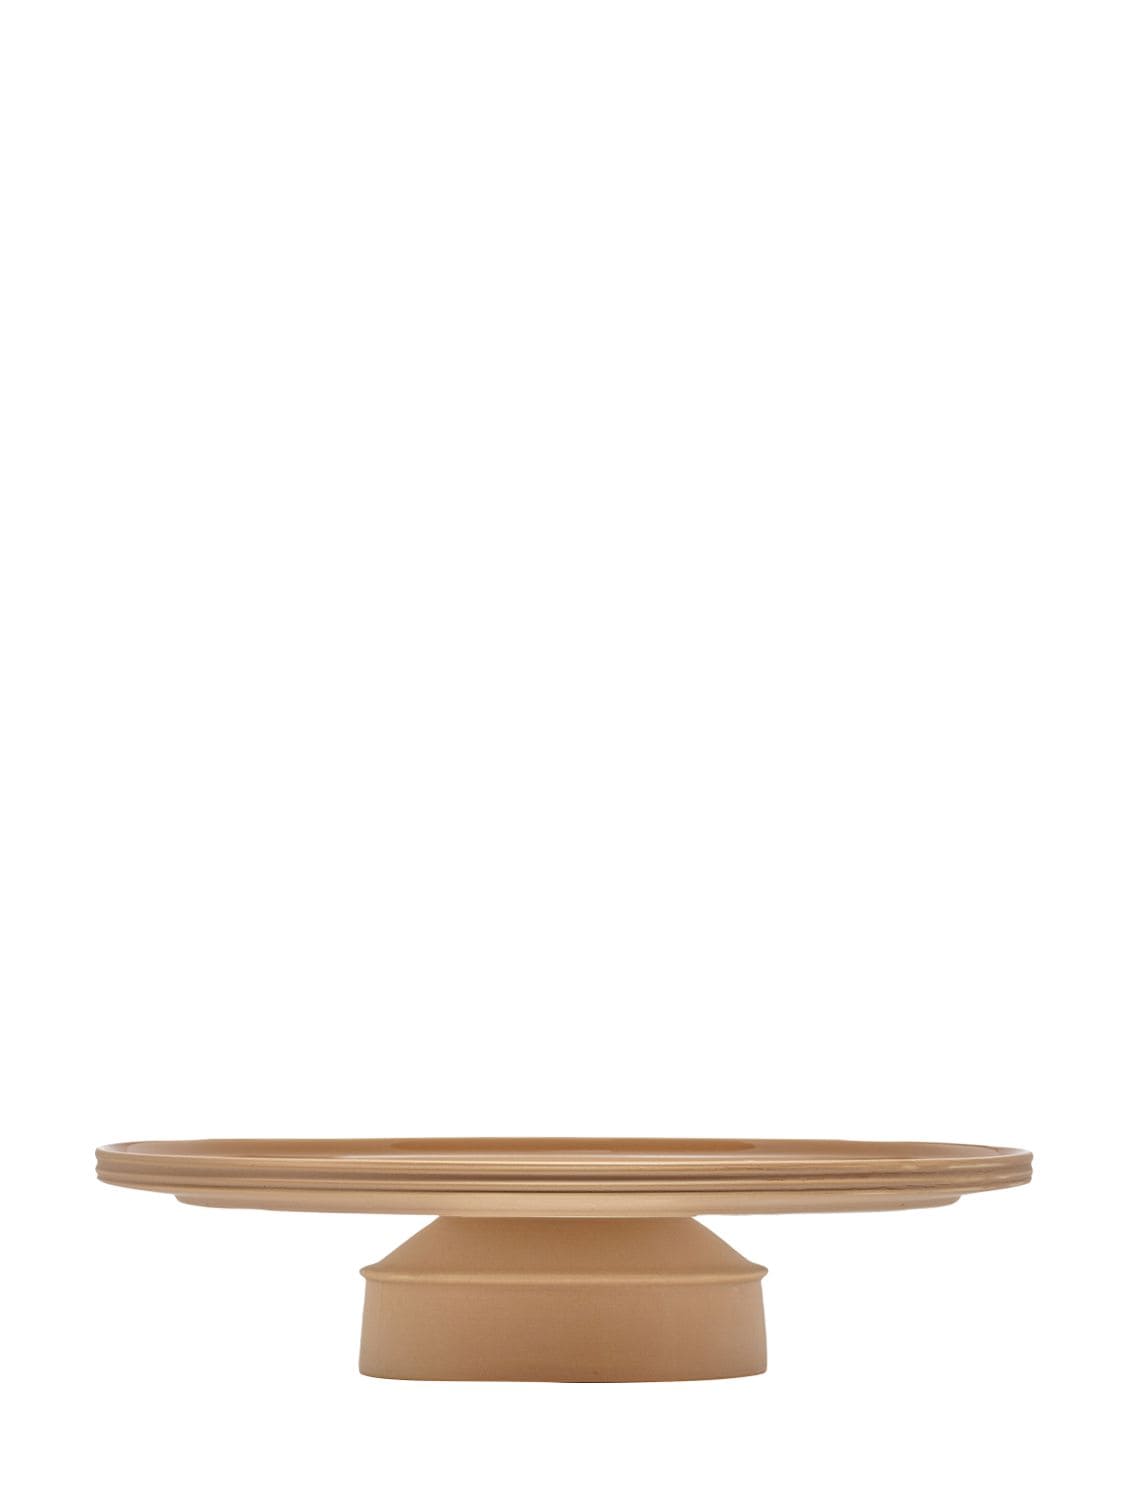 Image of Clay Dune Cake Stand